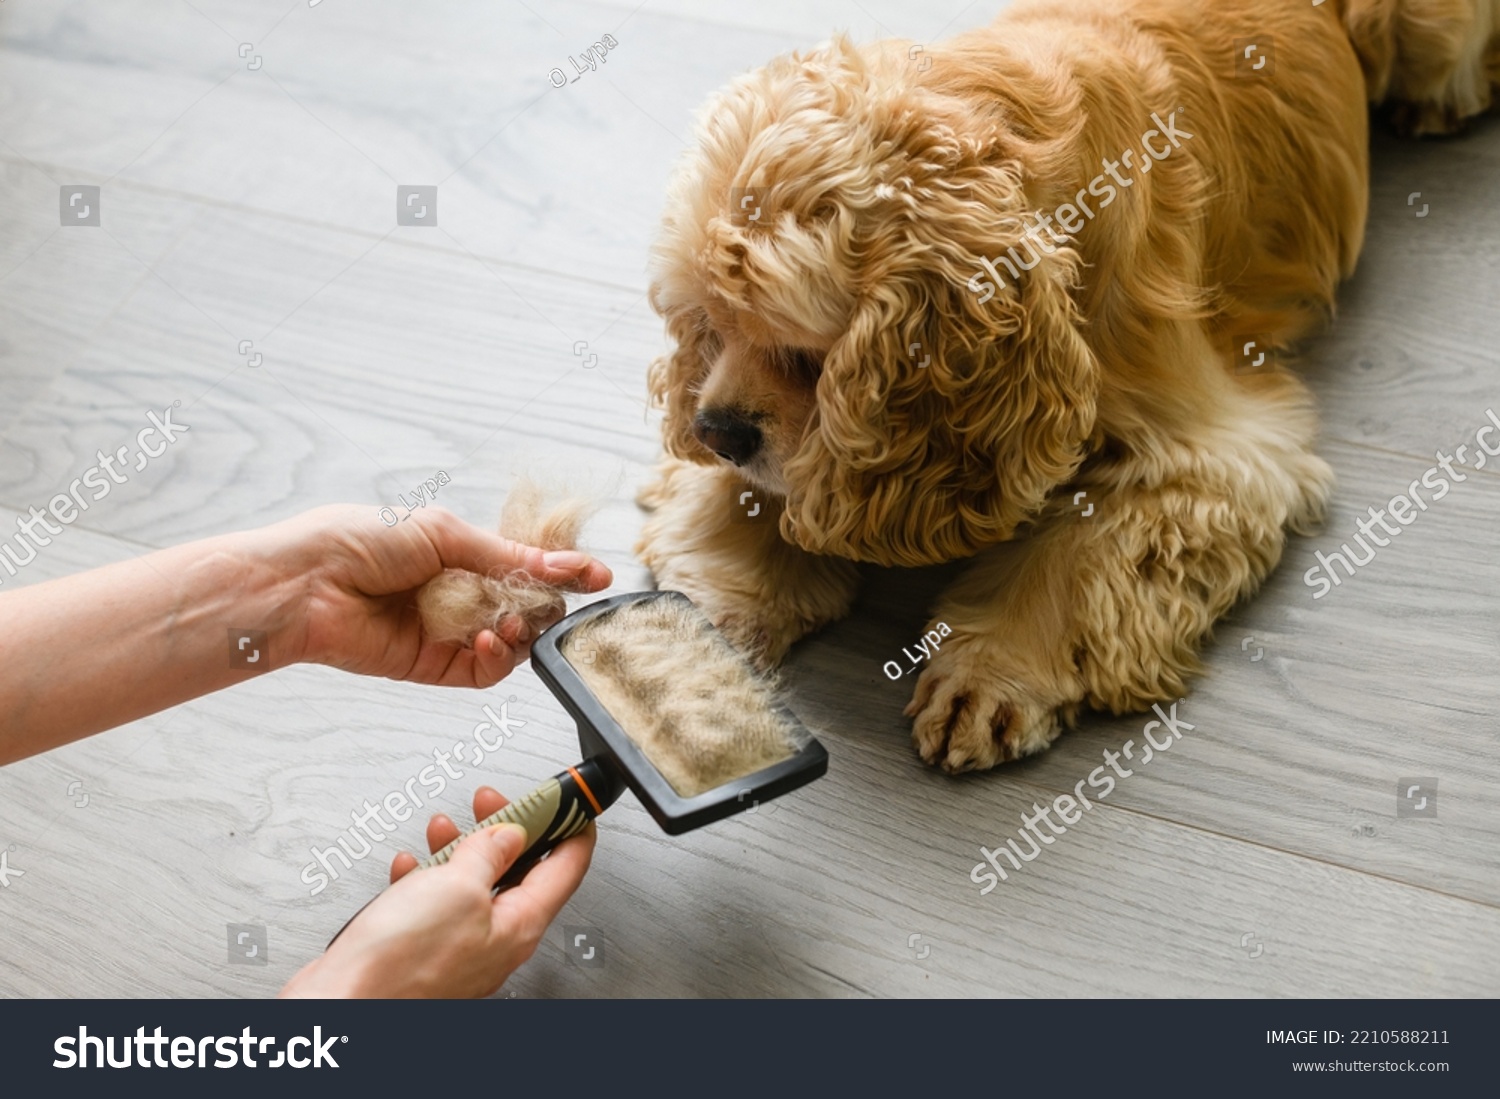 Woman brushing her dog. Pet care concept. Adorable American Cocker Spaniel lying on the floor at home. #2210588211